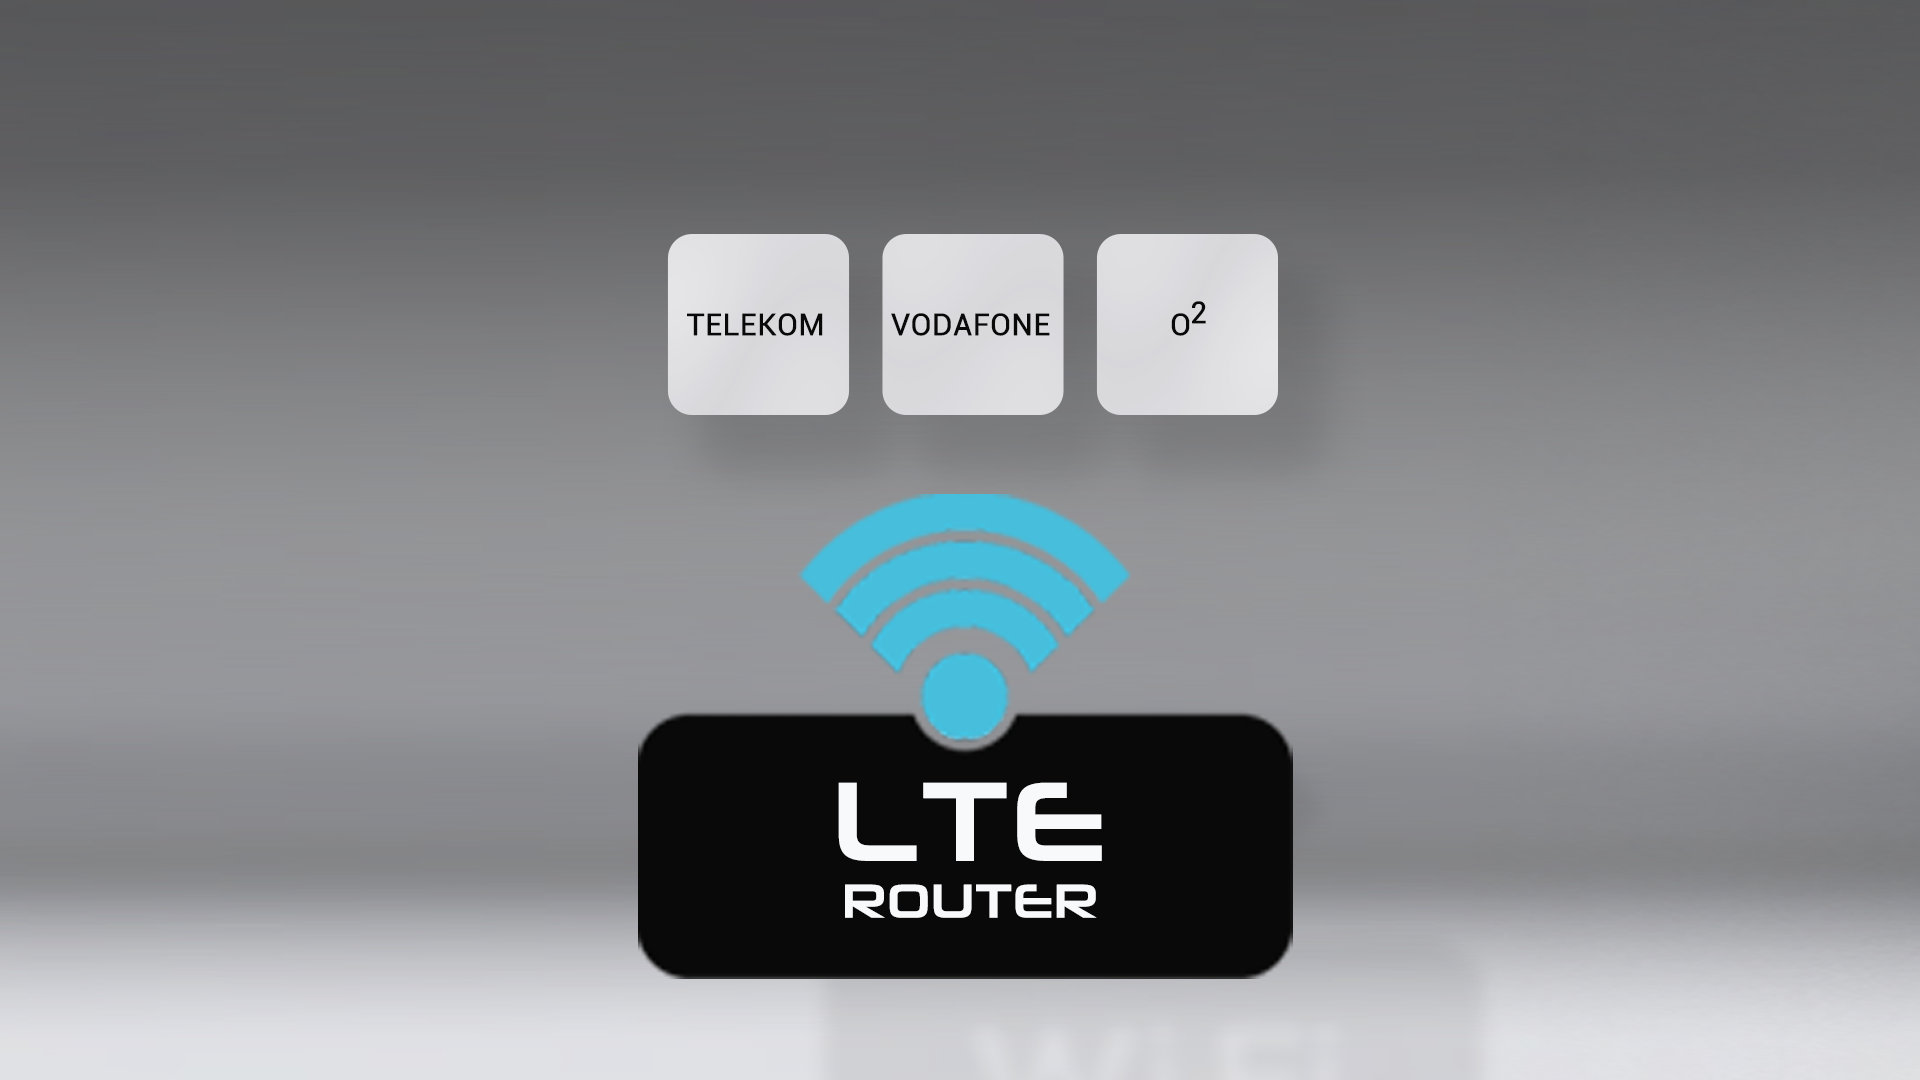 LTE ROUTER